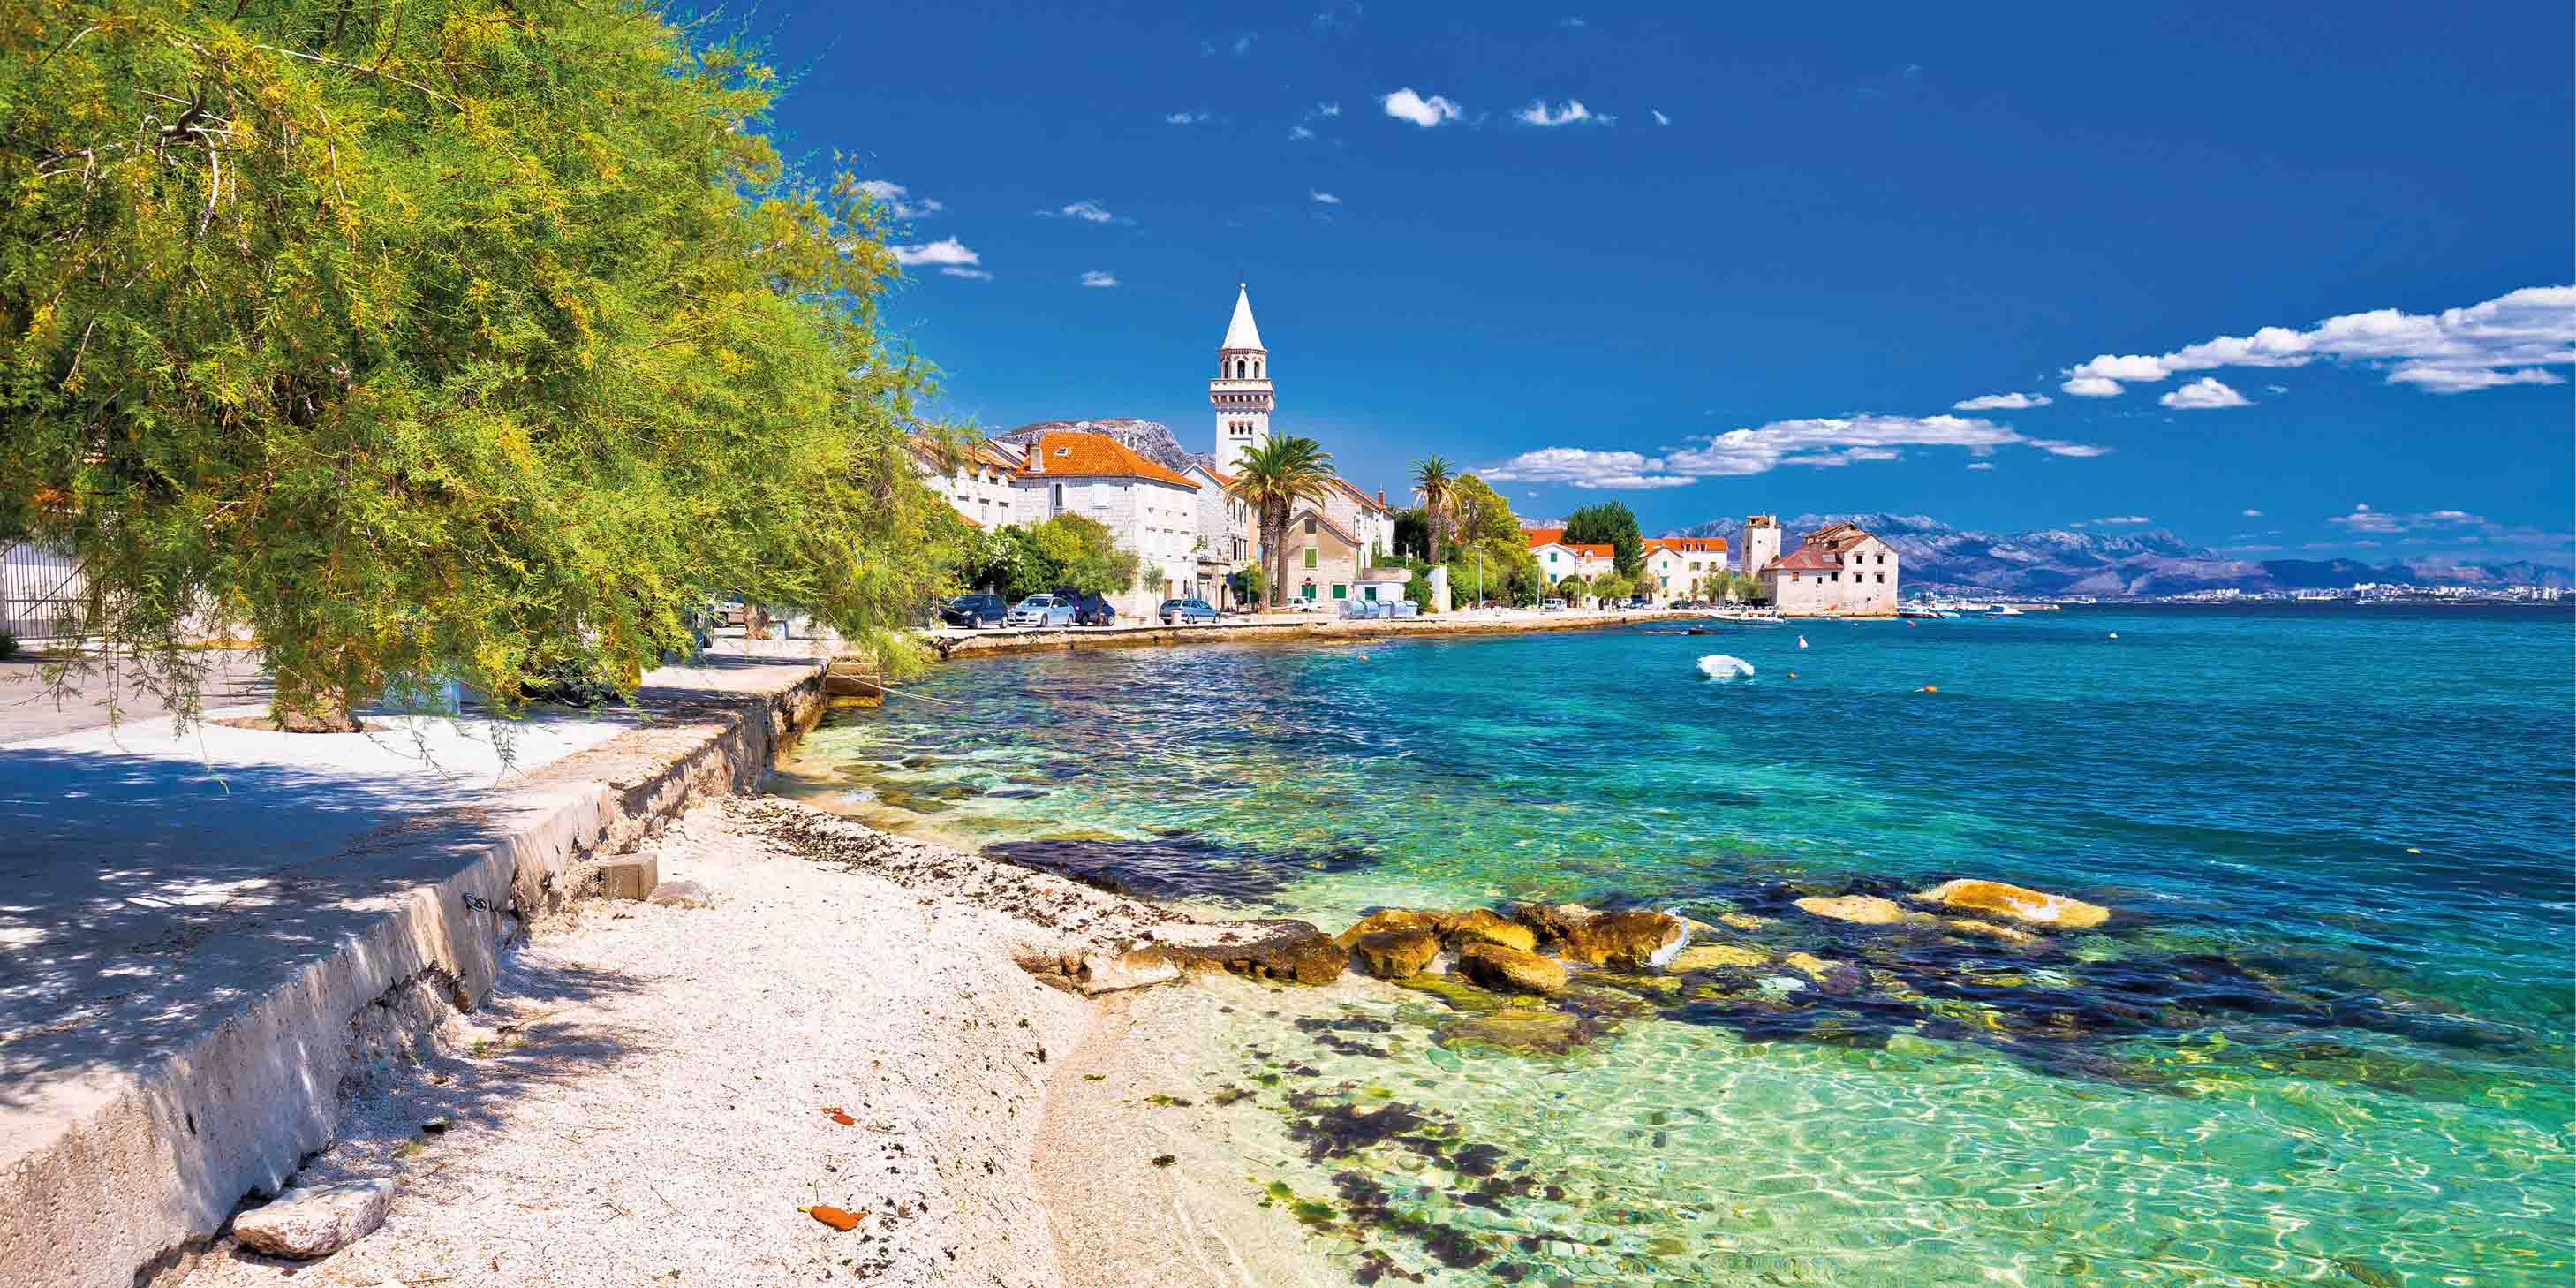 A coastal town in Croatia on a bright sunny day, along the shores of the crystalline waters